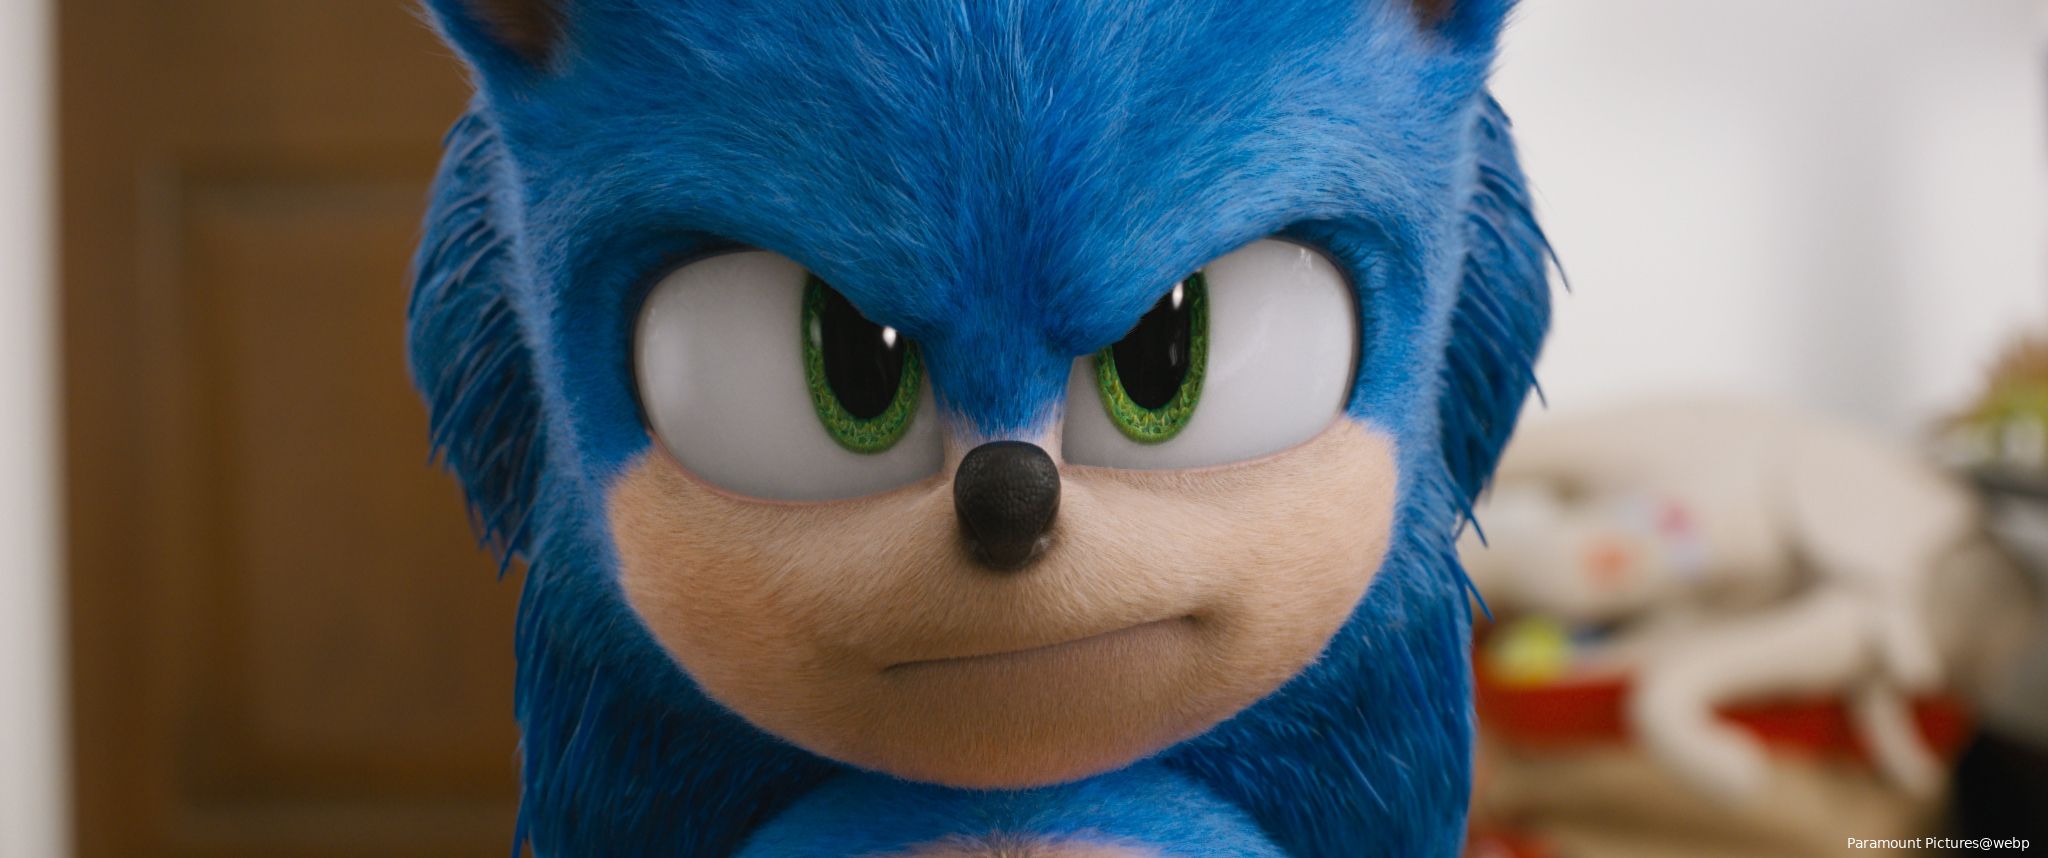 sonic ov st 7 jpg sd high copyright 2019 paramount pictures and sega of america inc all rights reservedf1622456615